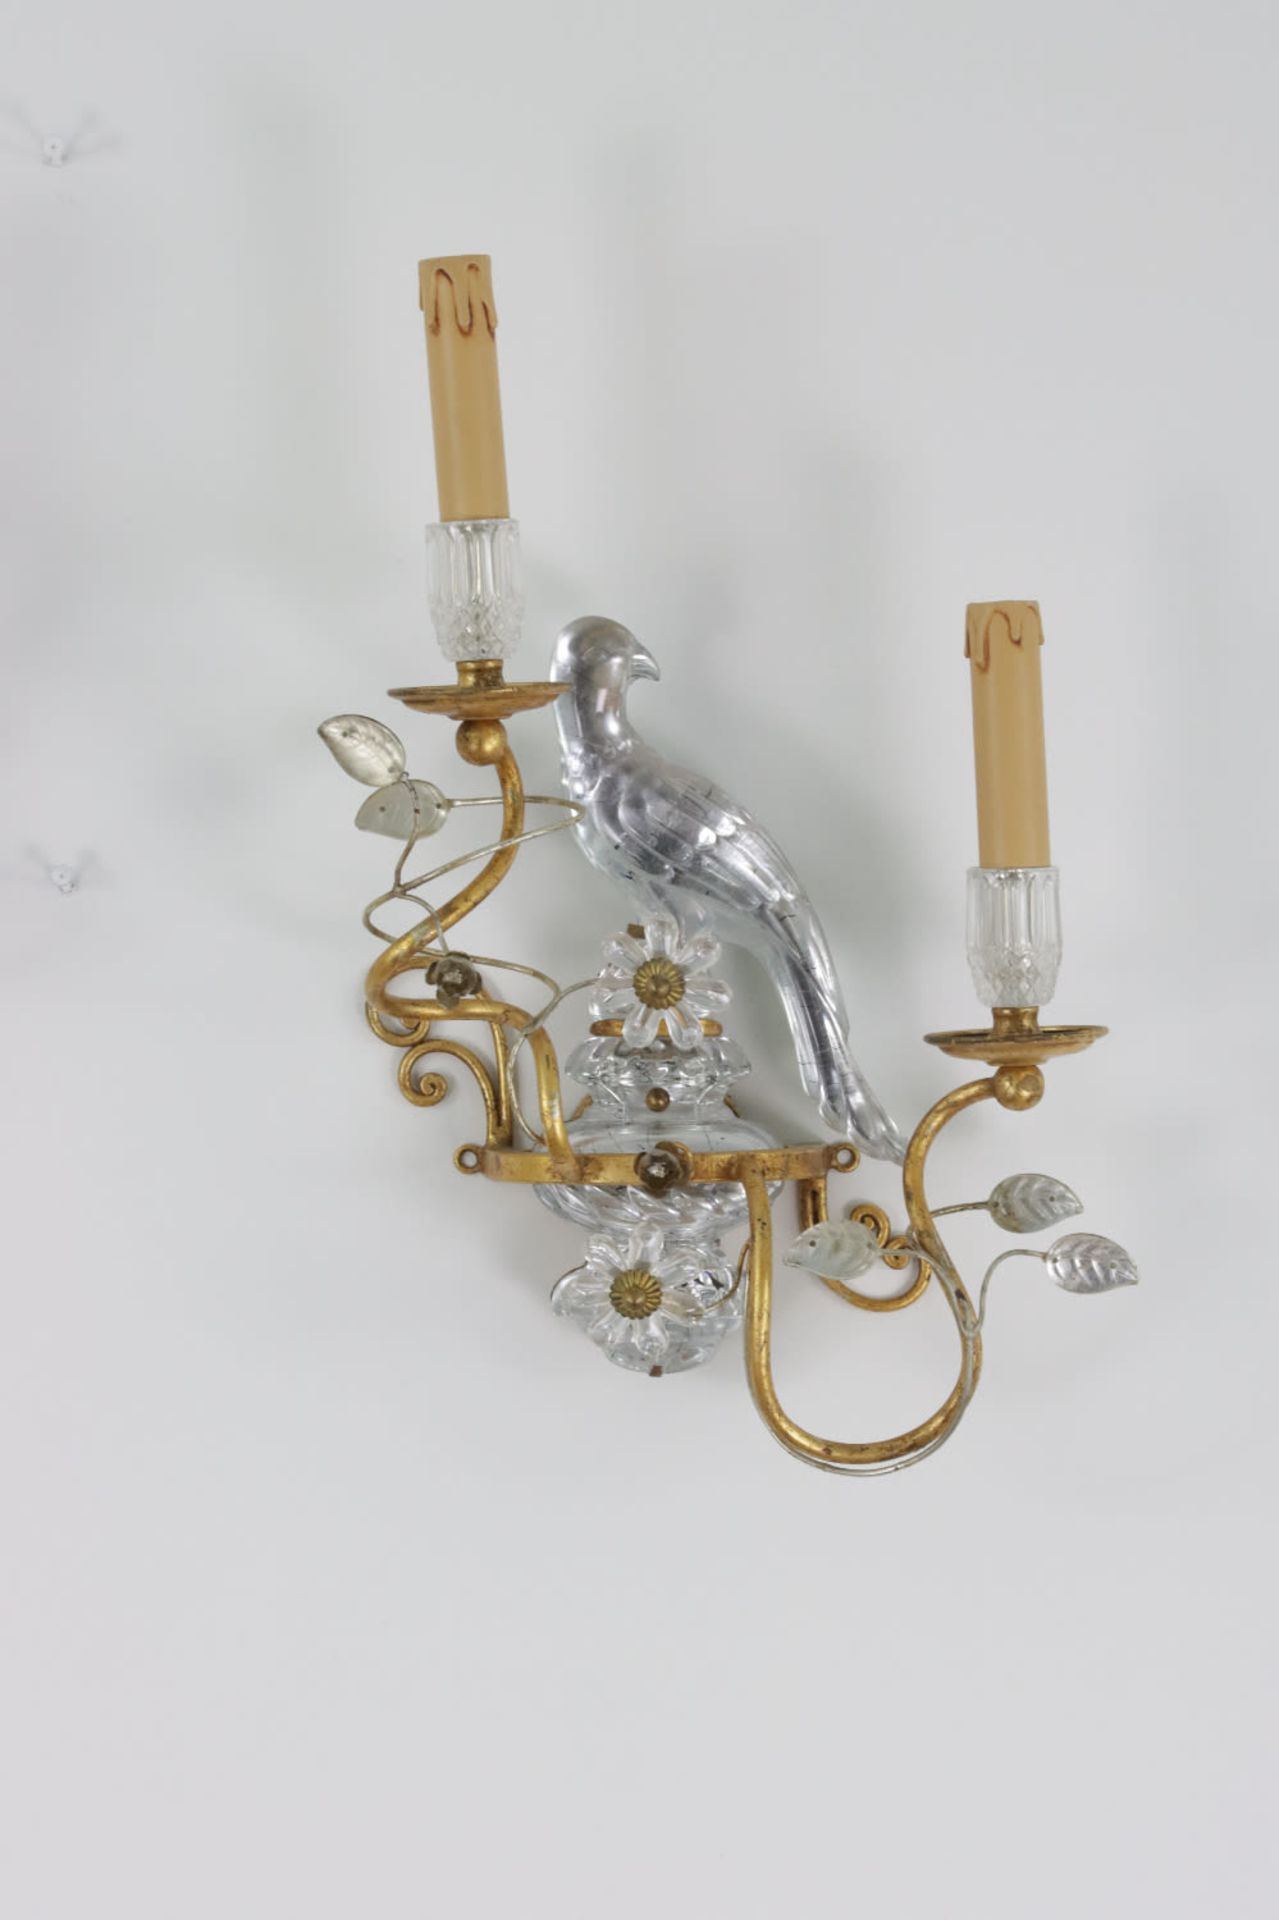 A Pair of crystal and gilt parrot wall lights by Banci Firenze, Mid 20th Century - Image 4 of 4